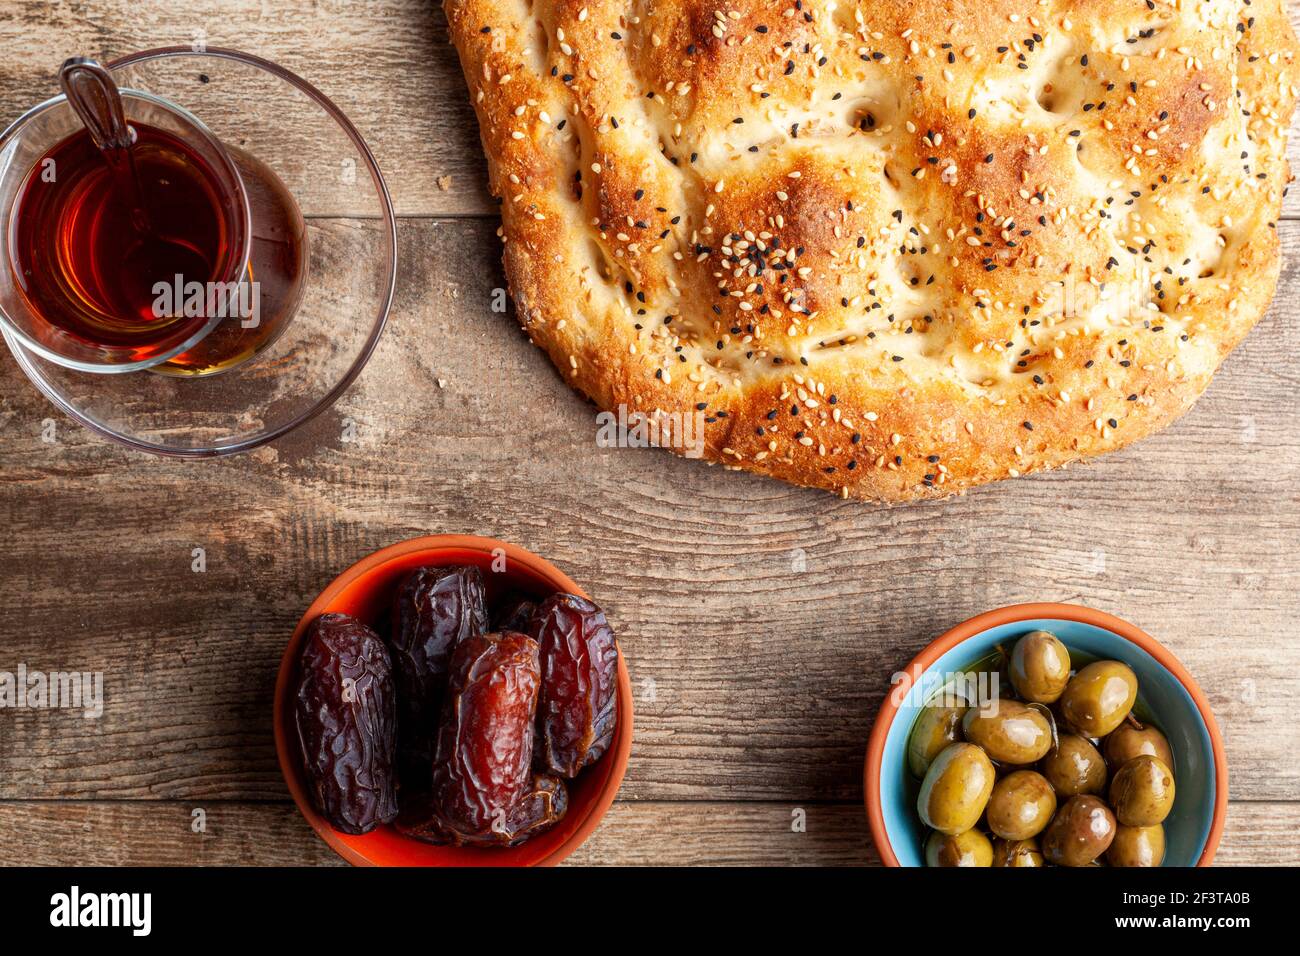 Flat lay image of a traditional meal for iftar and sahur in the holly fasting month of Ramadan. Turkish tea in special glasses, ramazan pidesi,  a typ Stock Photo